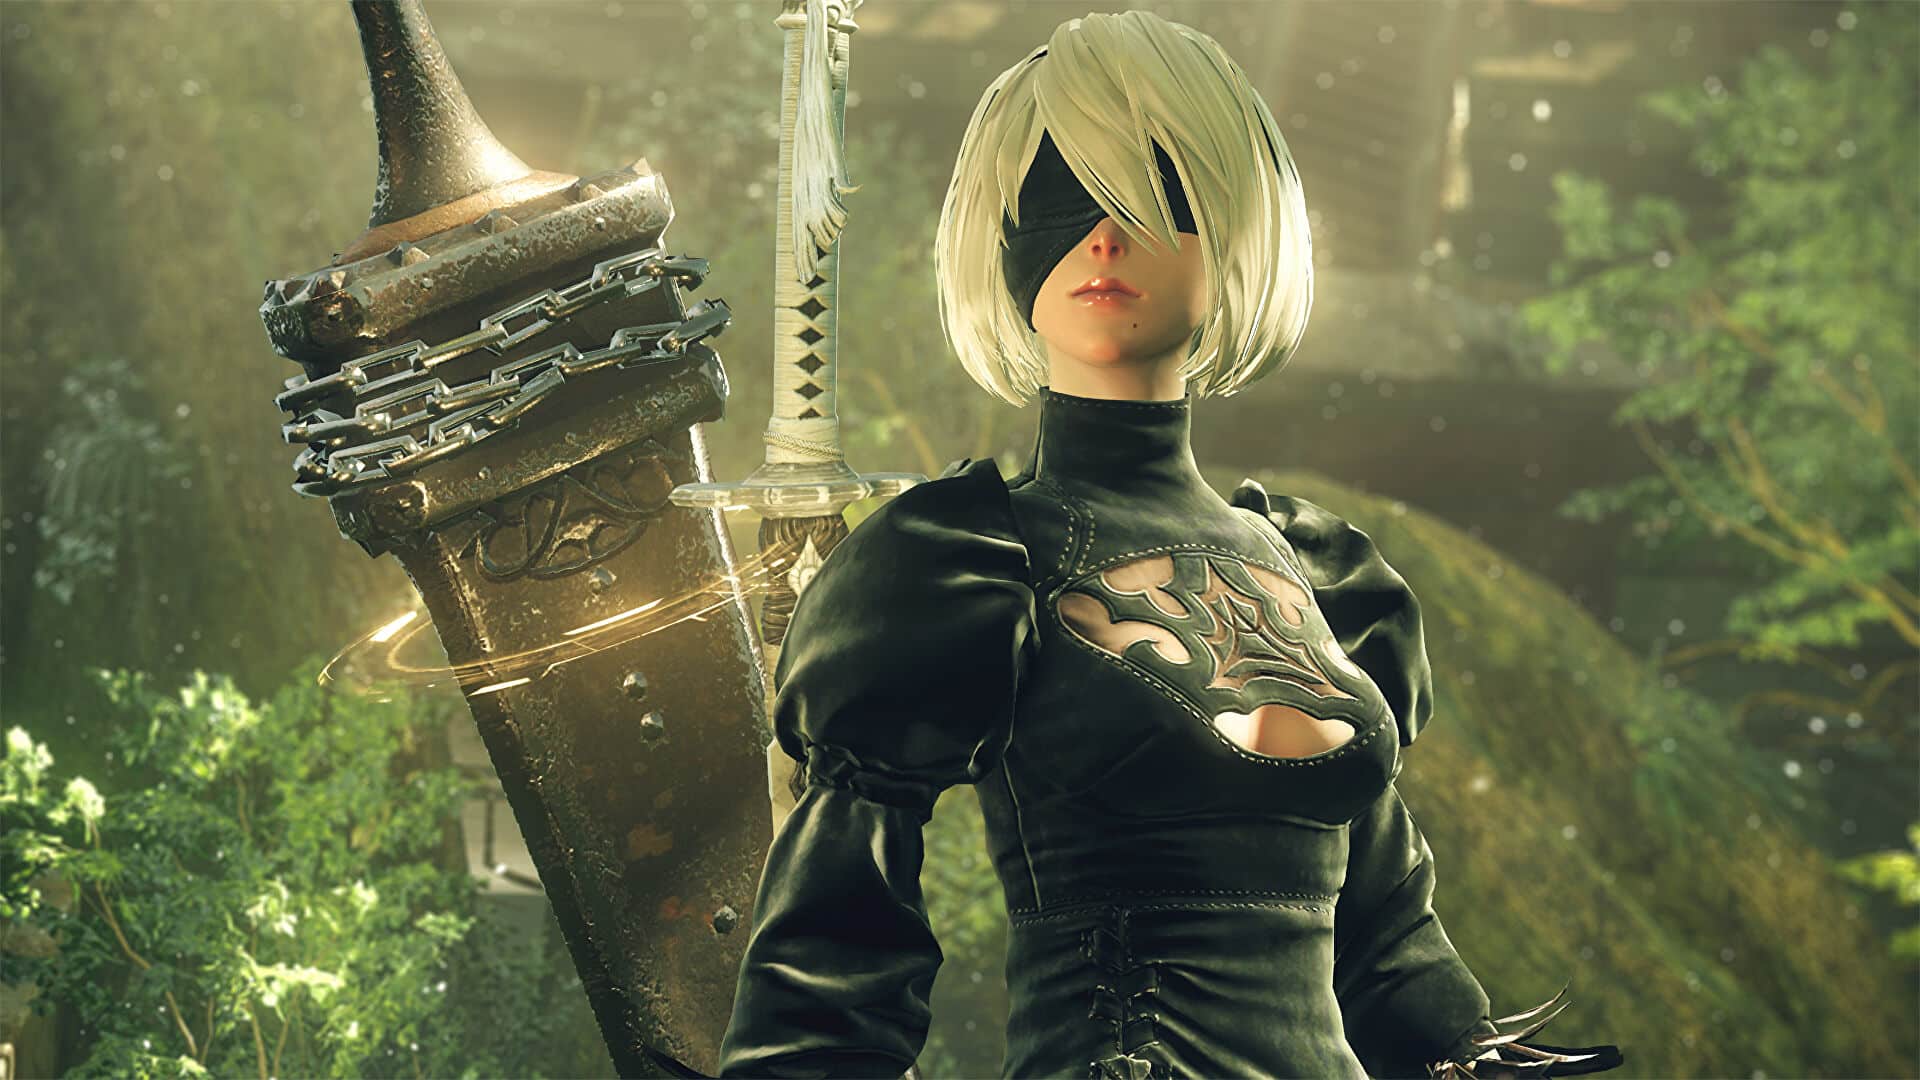 Nier: Automata 'secret church' mystery leads to mod tools and memes